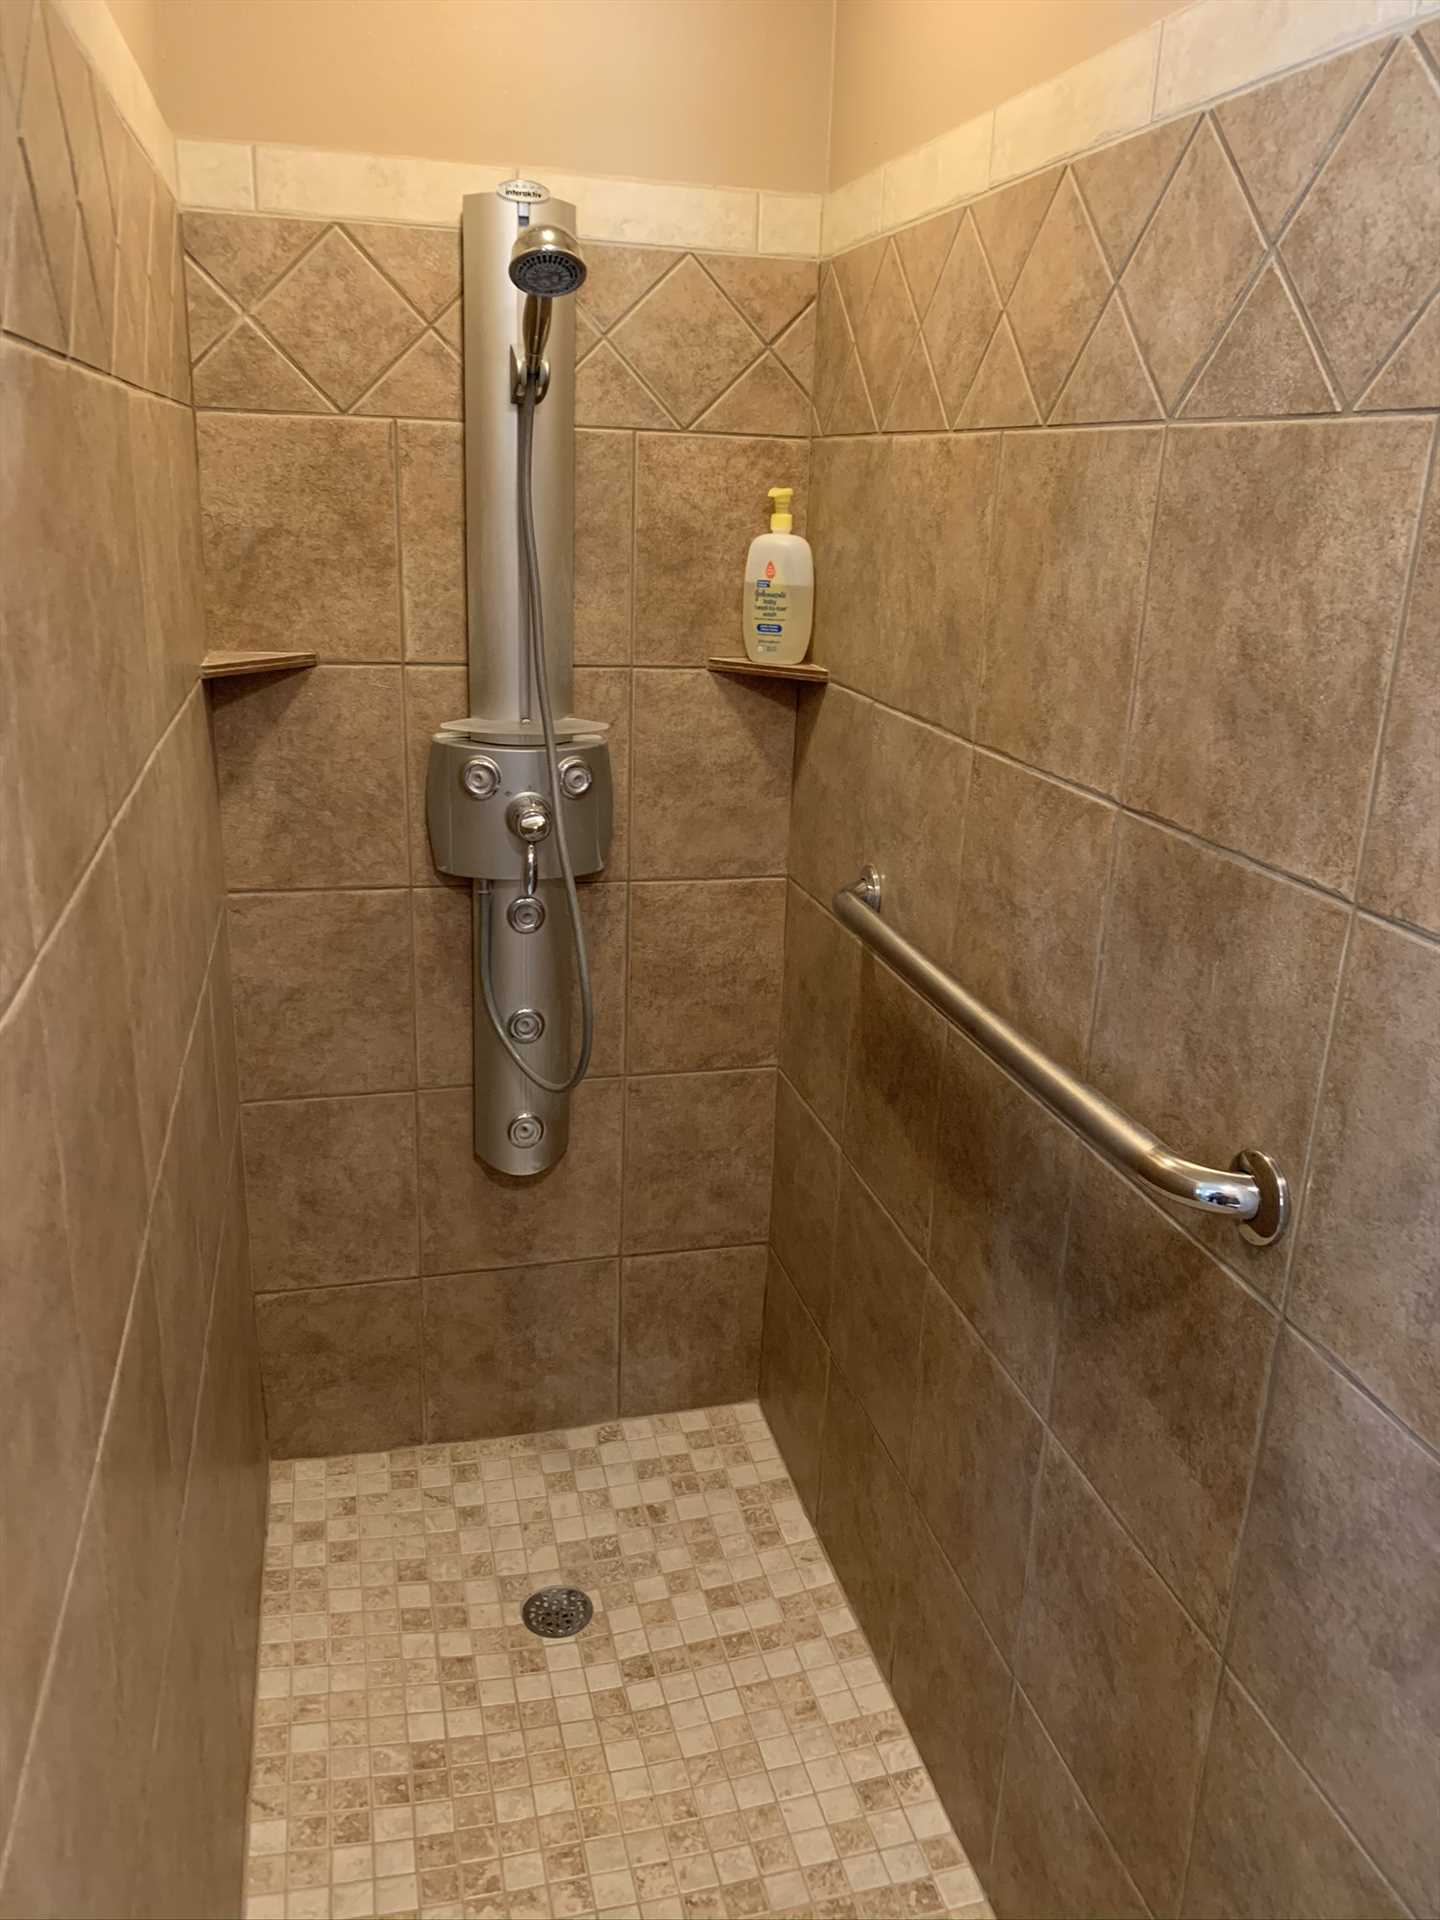                                                 ...an ADA-approved walk-in shower stall with a sturdy brace! All bath linens are supplied here, too.